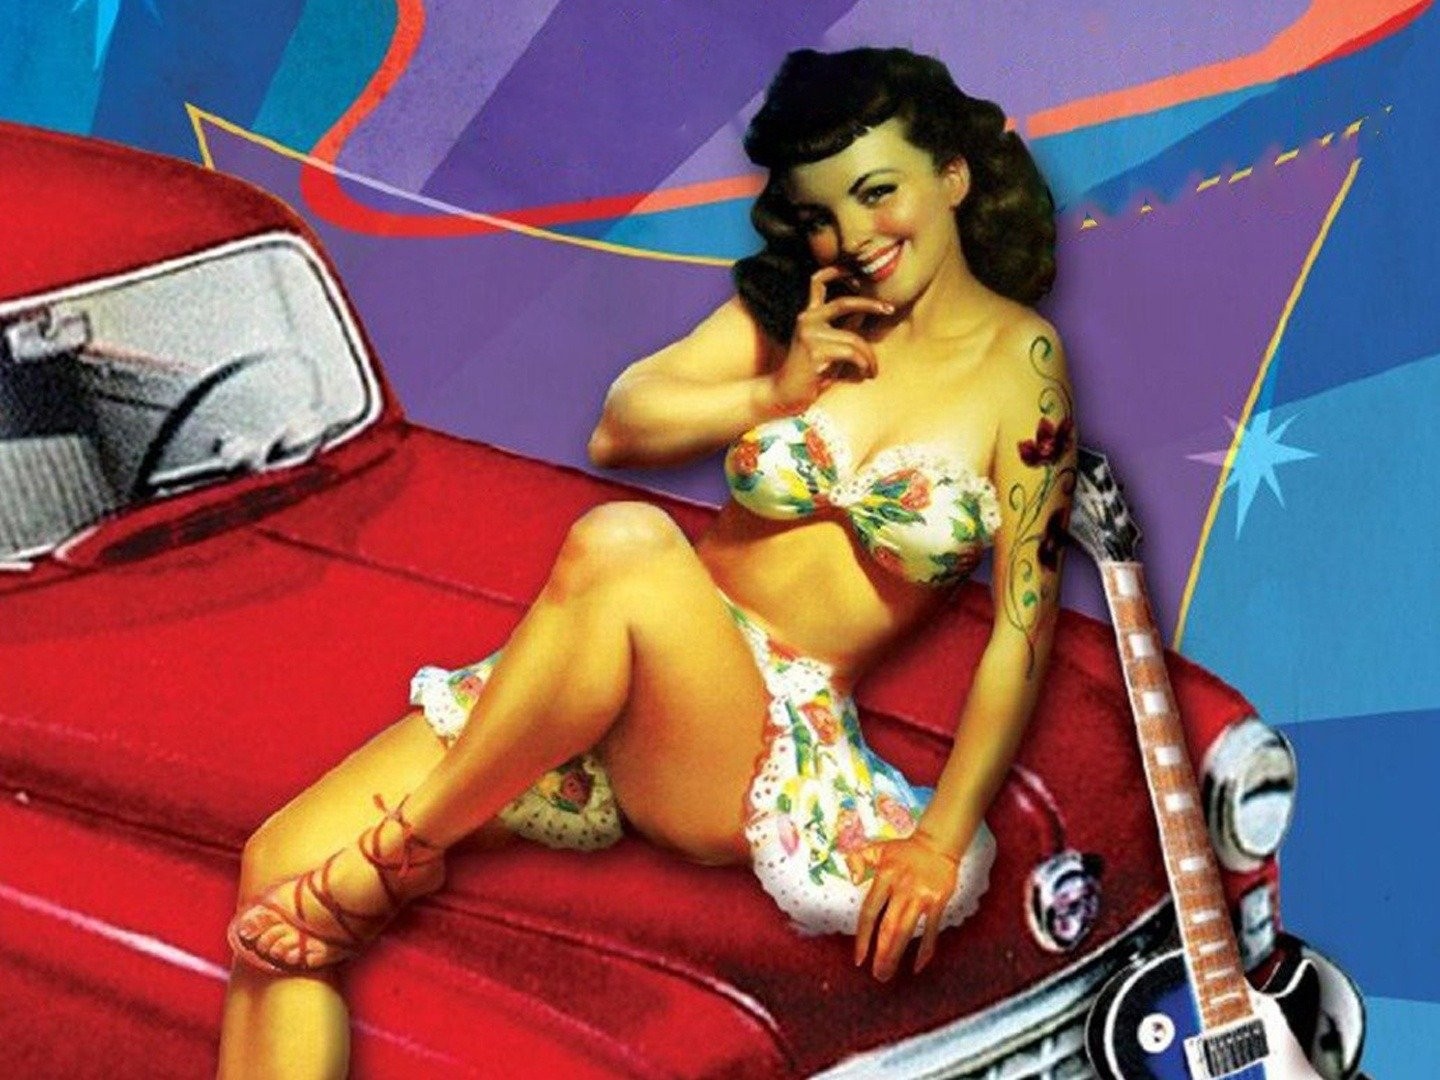 Eclectic Ladies - Rockabilly girl by awhich car is that ? By